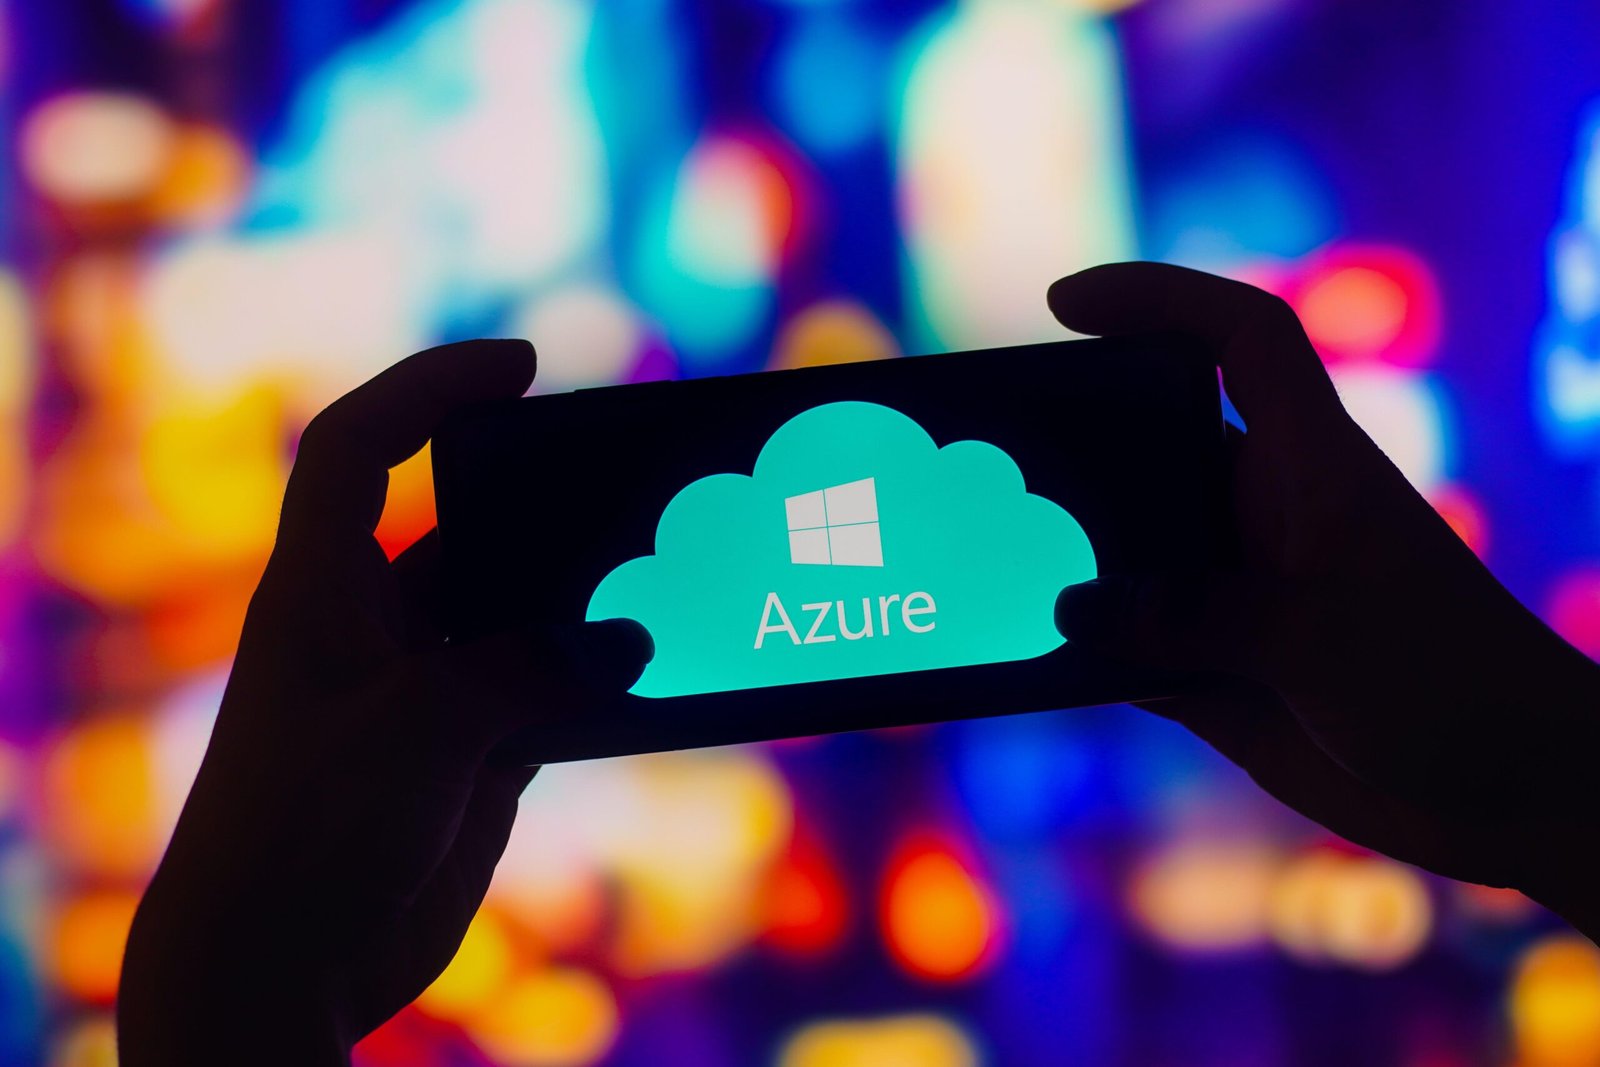 Microsoft Patches Serious Azure Cloud Security Flaws – Source: www.darkreading.com